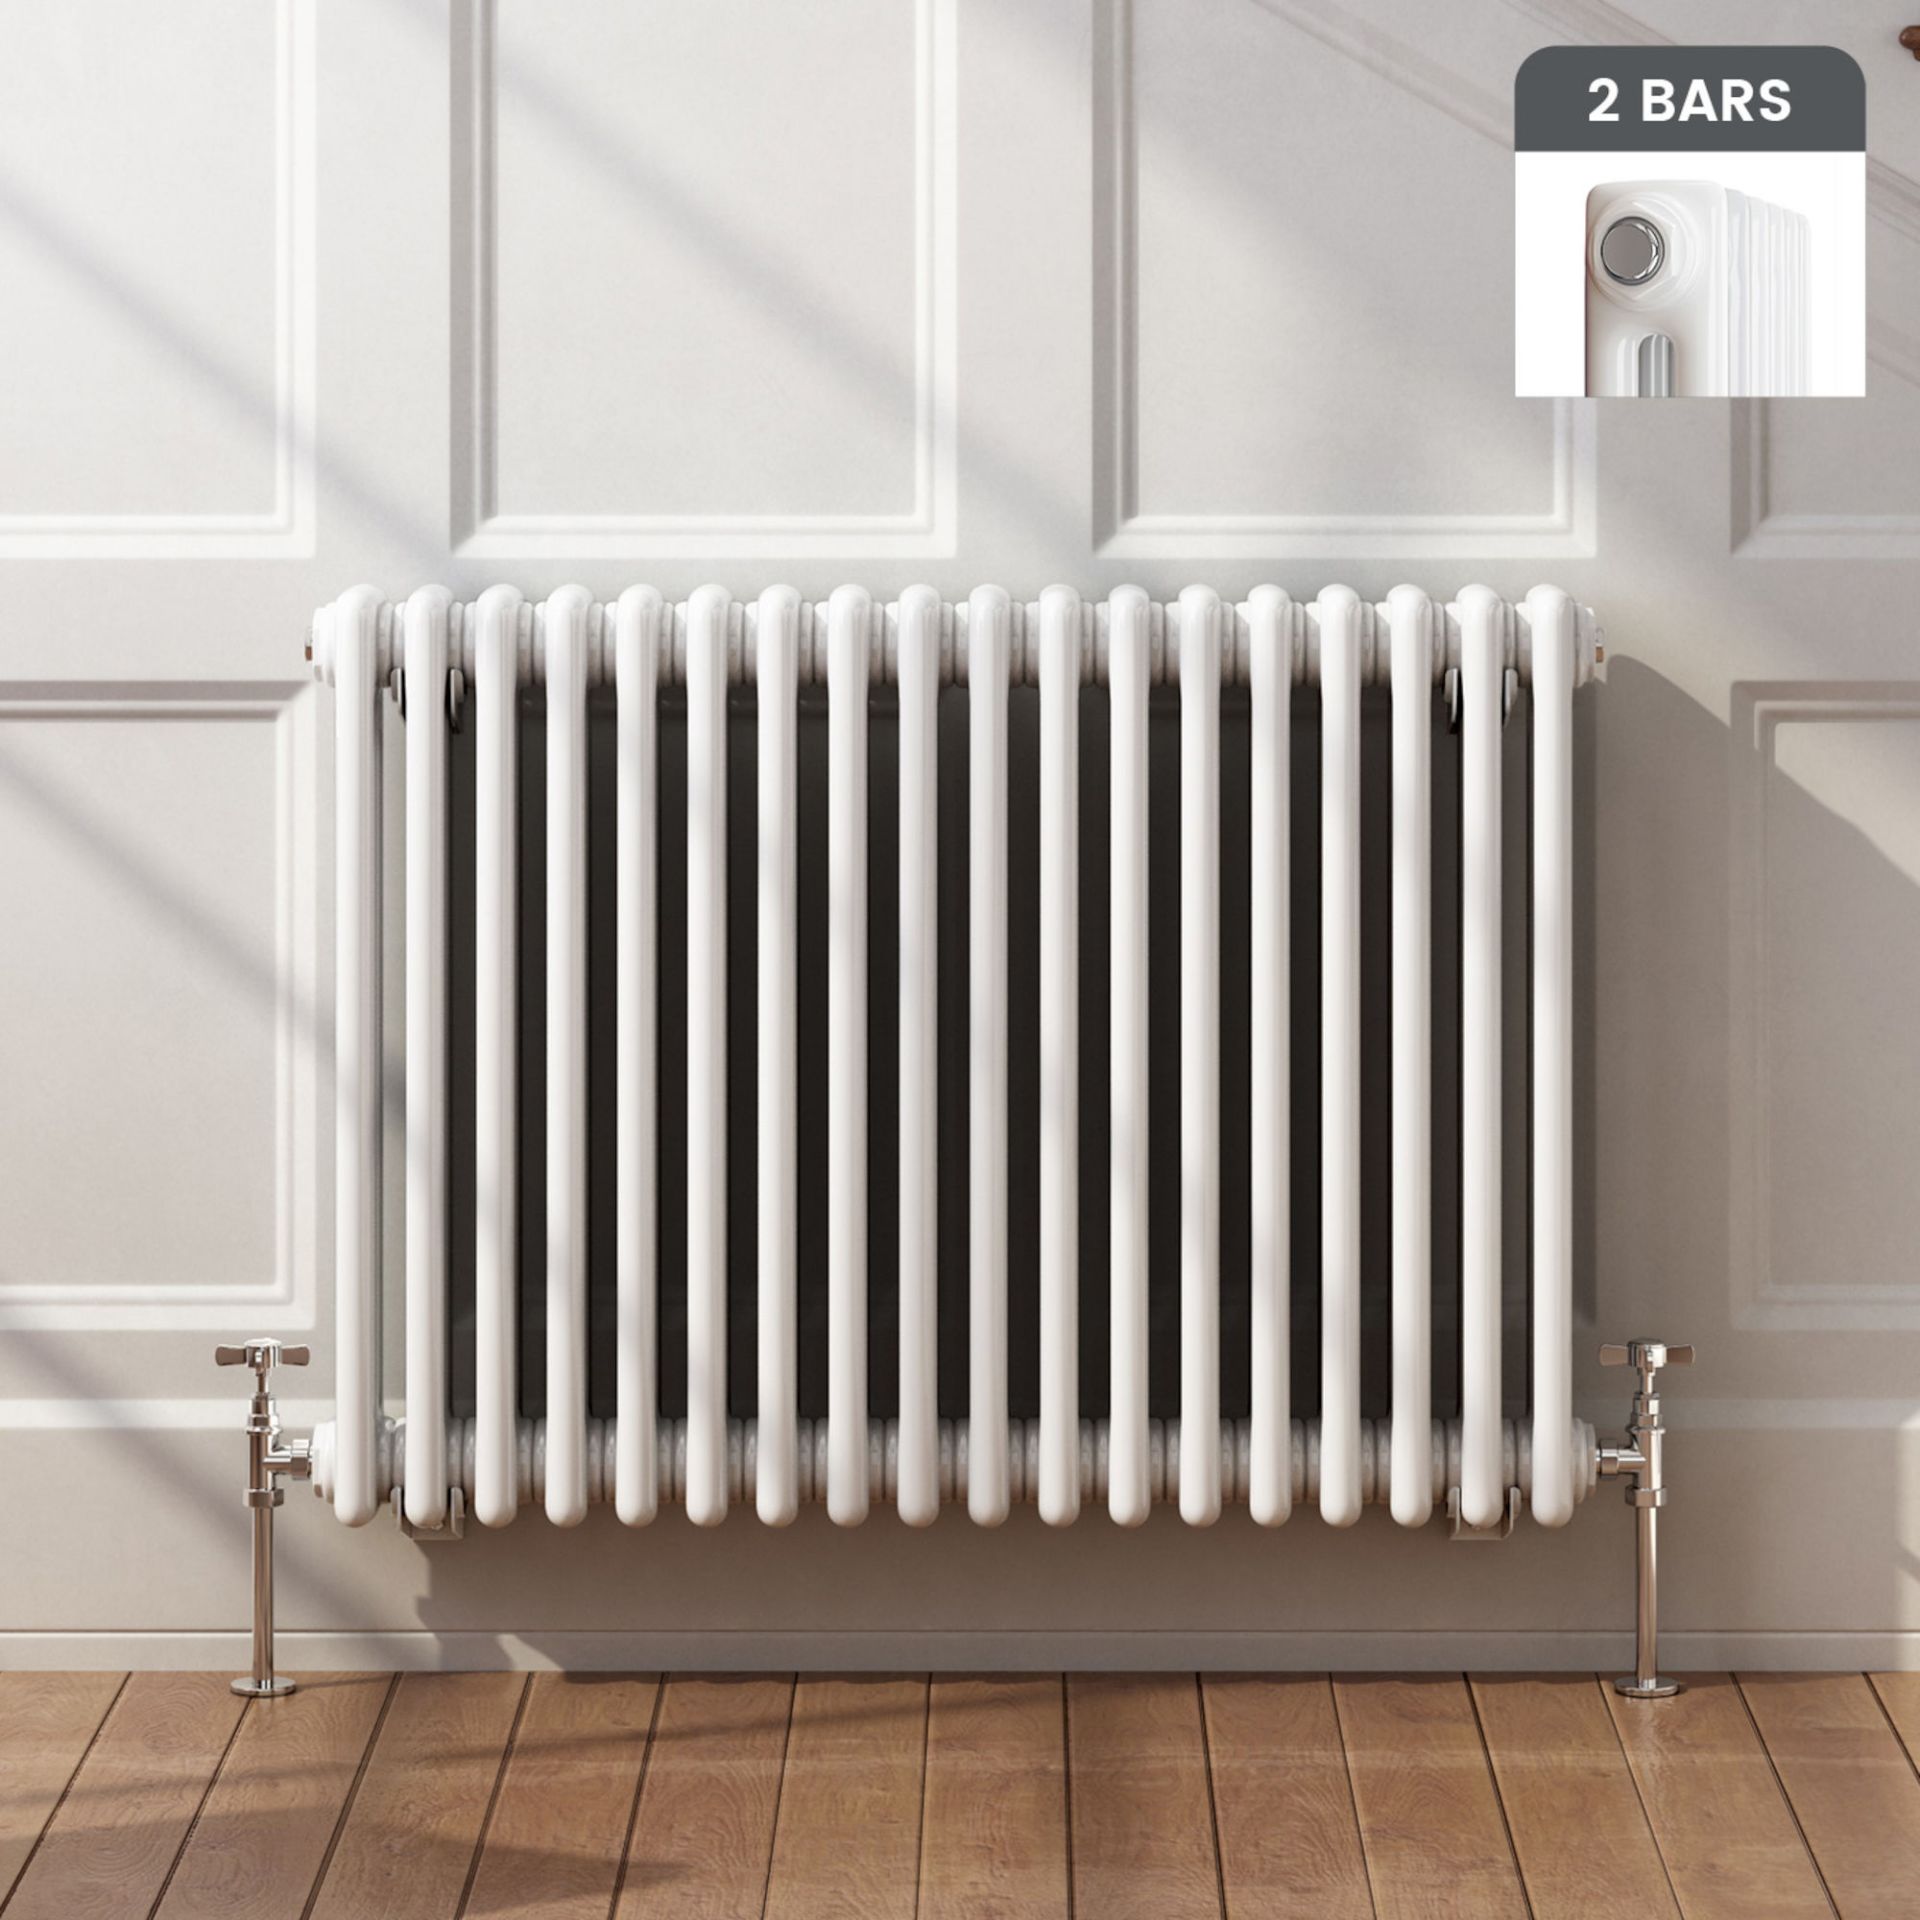 (YC41) 500x812mm White Double Panel Horizontal Colosseum Traditional Radiator. RRP £469.99. Made